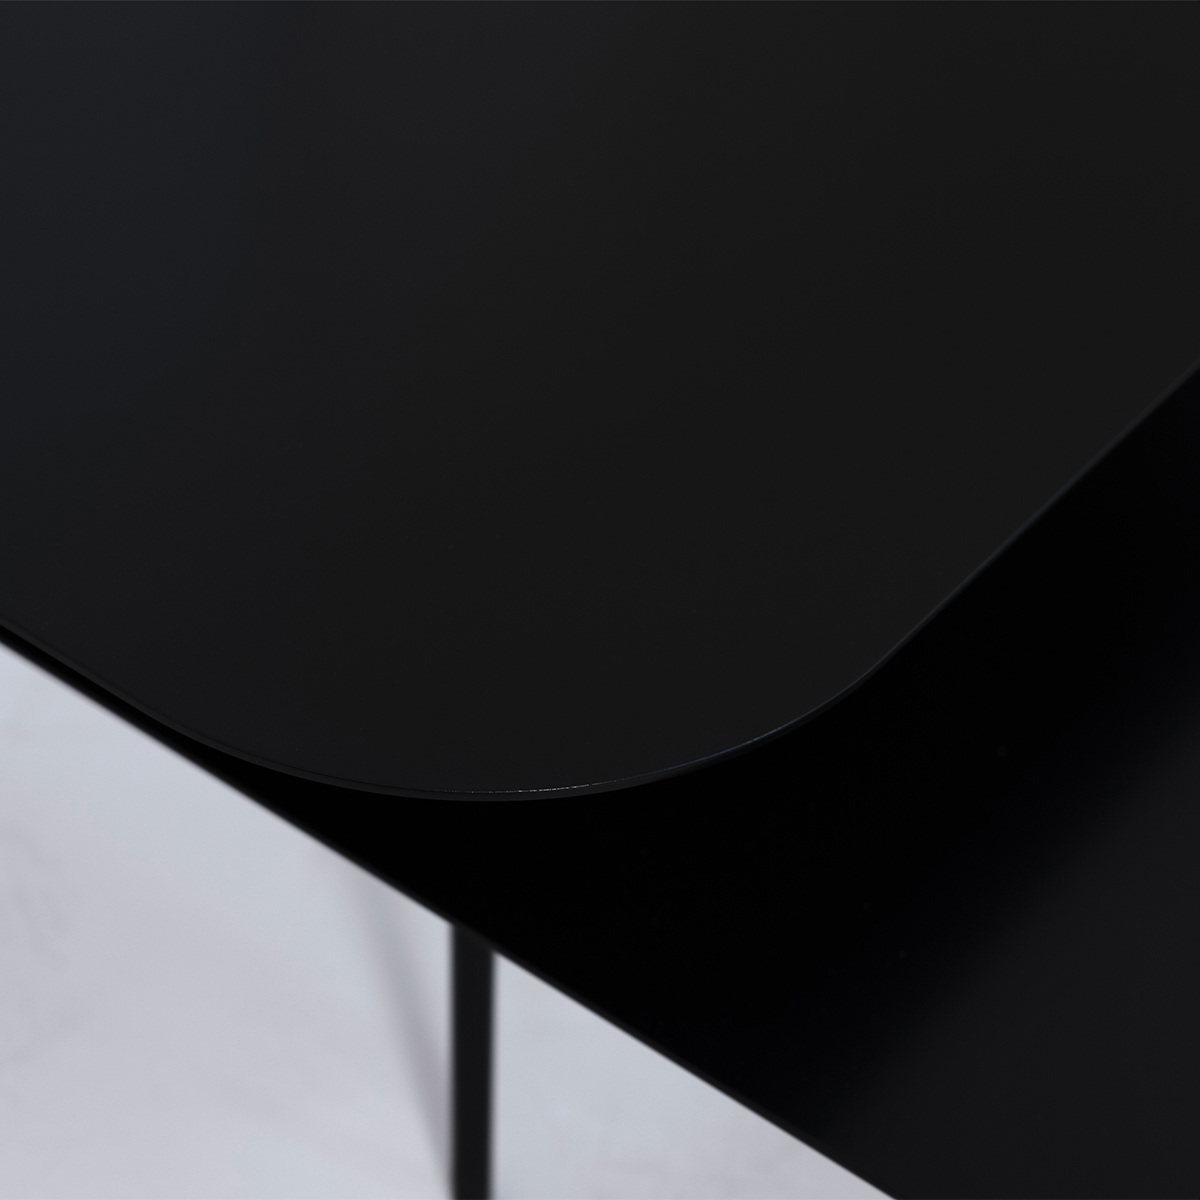 Coffee Table Tokyo Offset Tabletop, Black - L150 x W80 x H40 cm - Powder coated steel - image 3